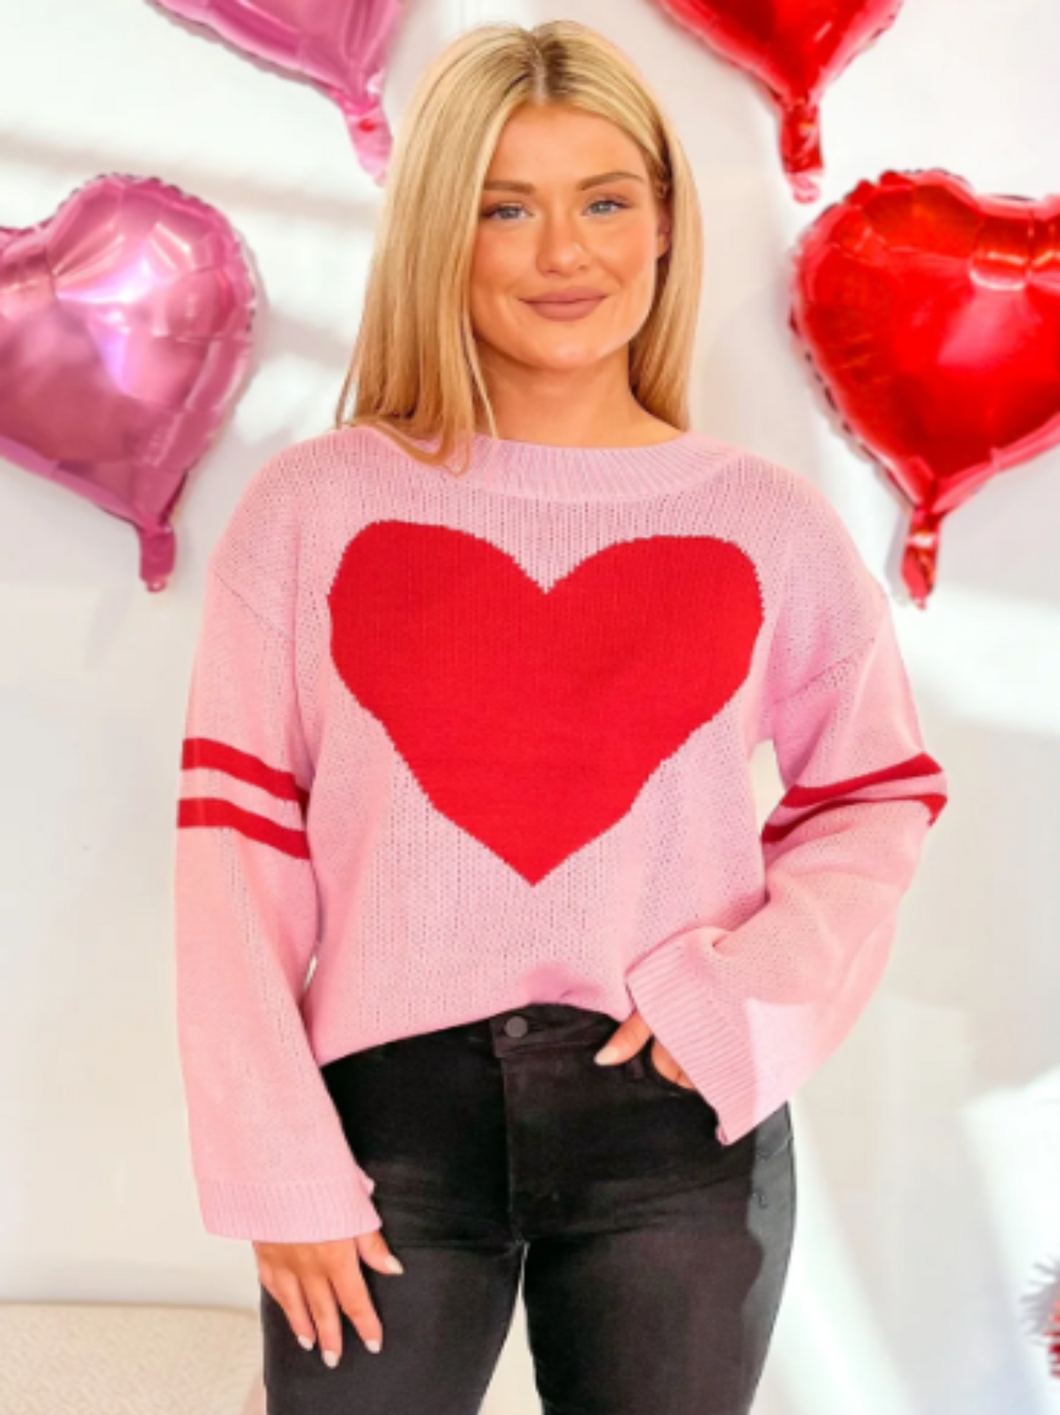 All My Heart Sweater: Small